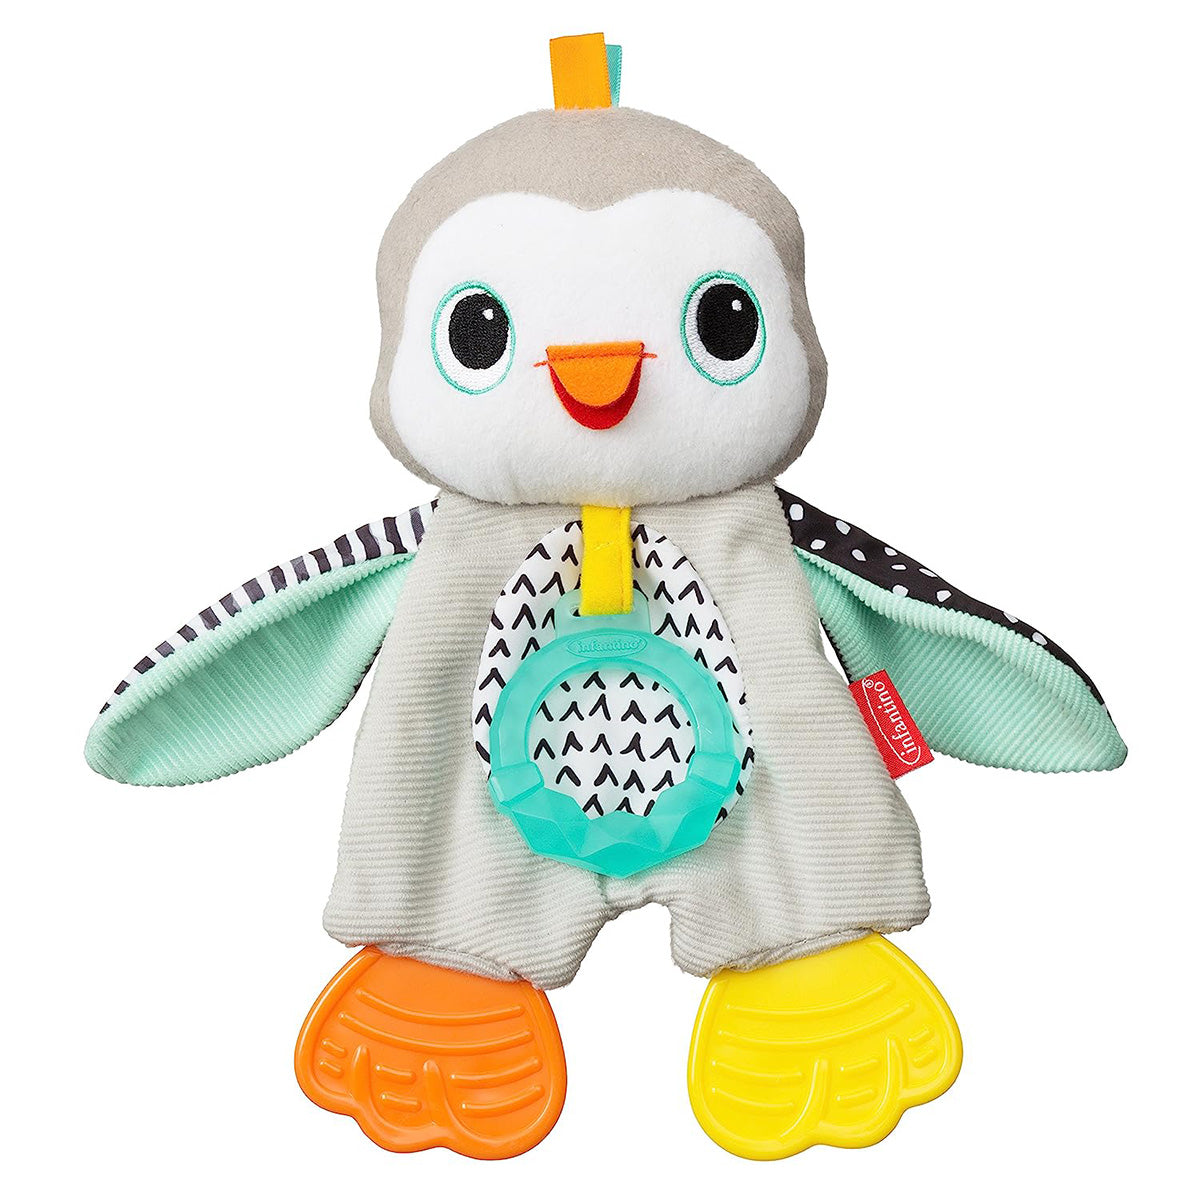 Infantino - Cuddly Teether - Penguin